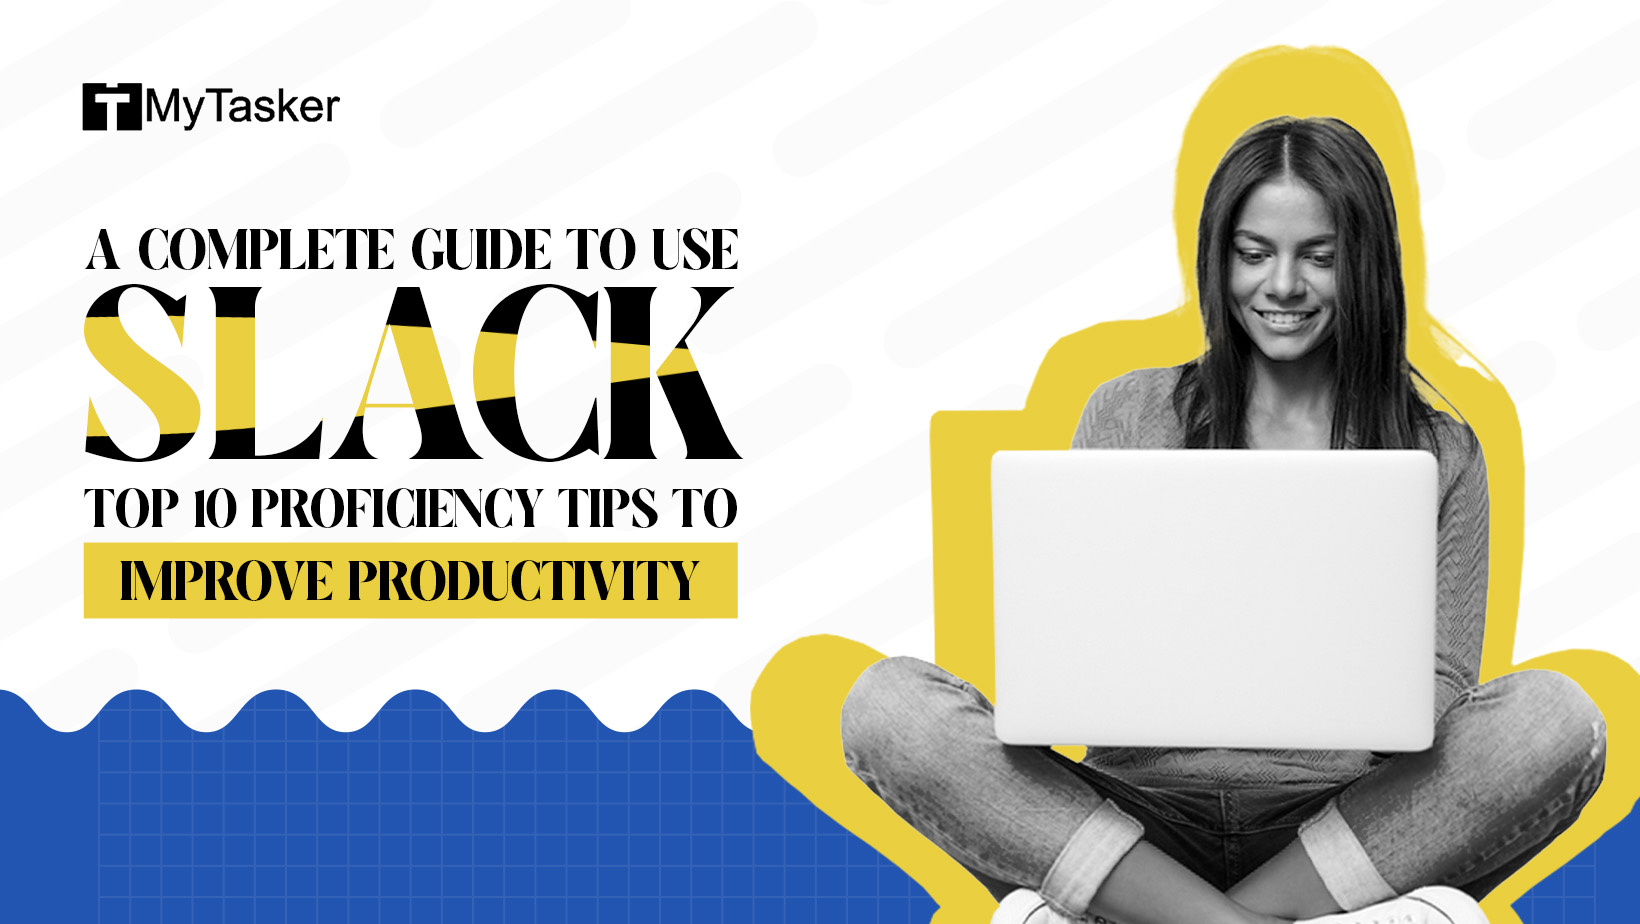 A Complete Guide To Use Slack: Top 10 Proficiency Tips To Improve Productivity